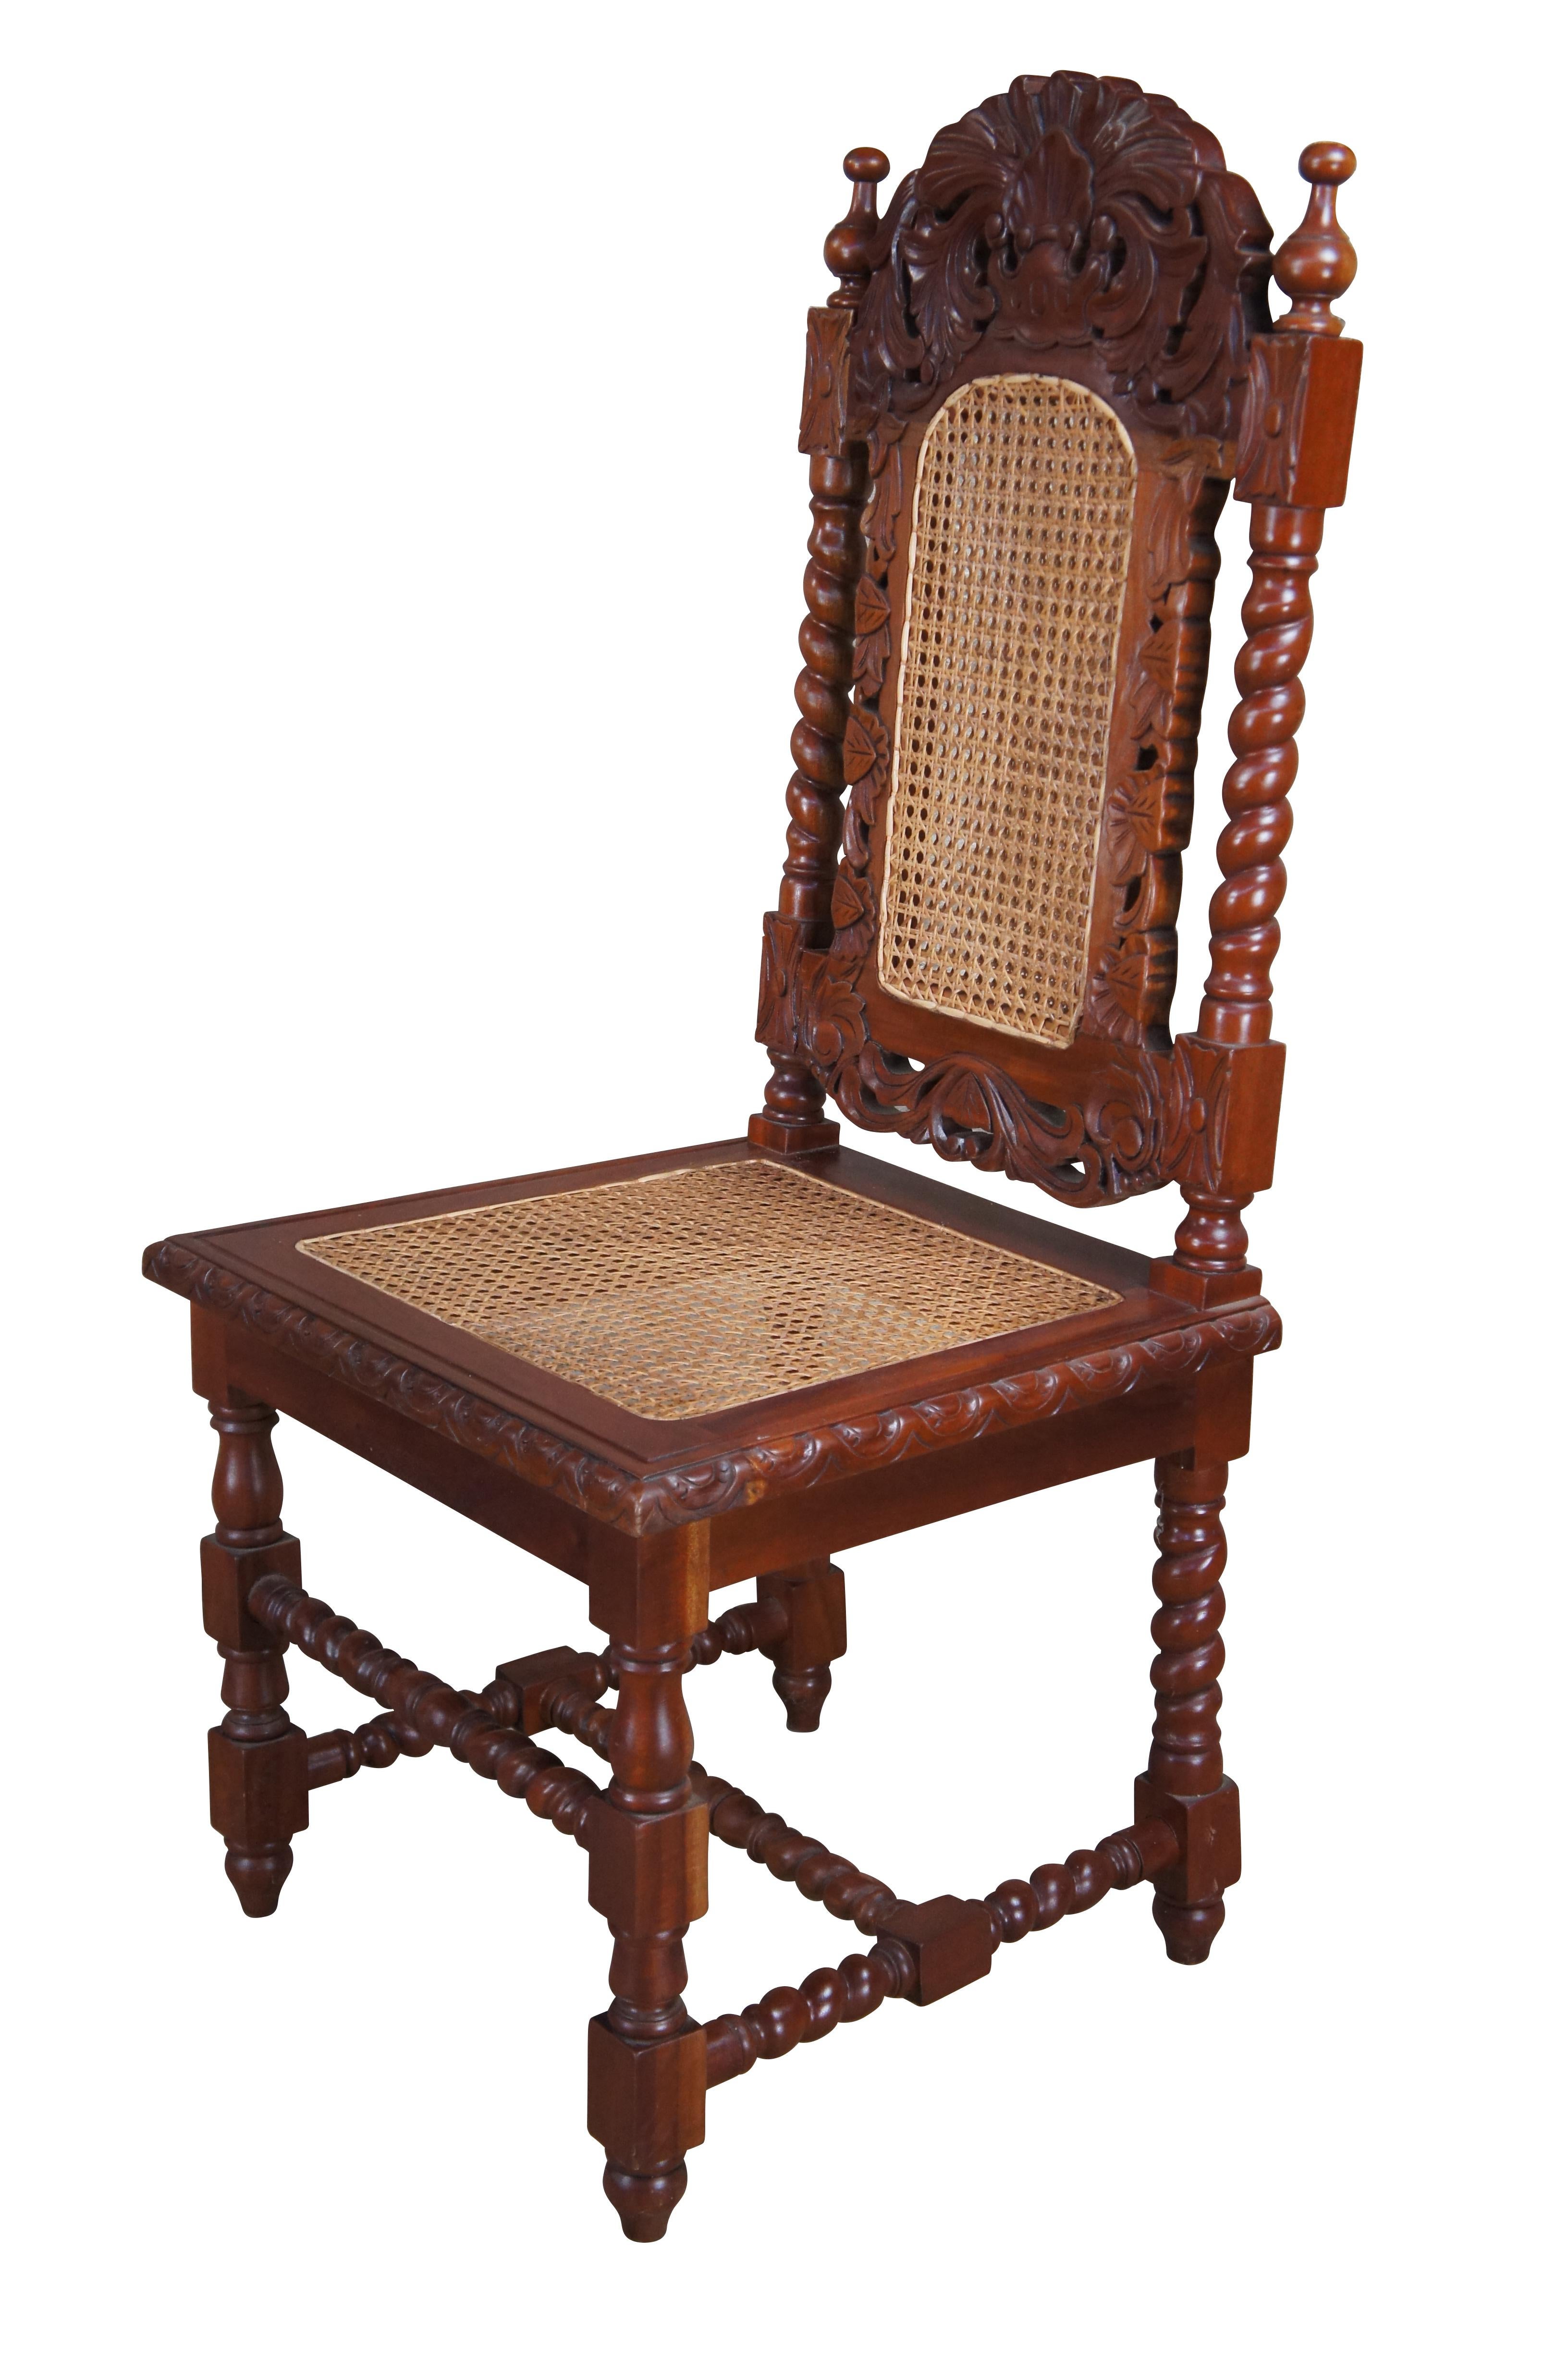 2 French Louis XIII Style Mahogany Carved Barley Twist Cane Dining Side Chairs In Good Condition For Sale In Dayton, OH